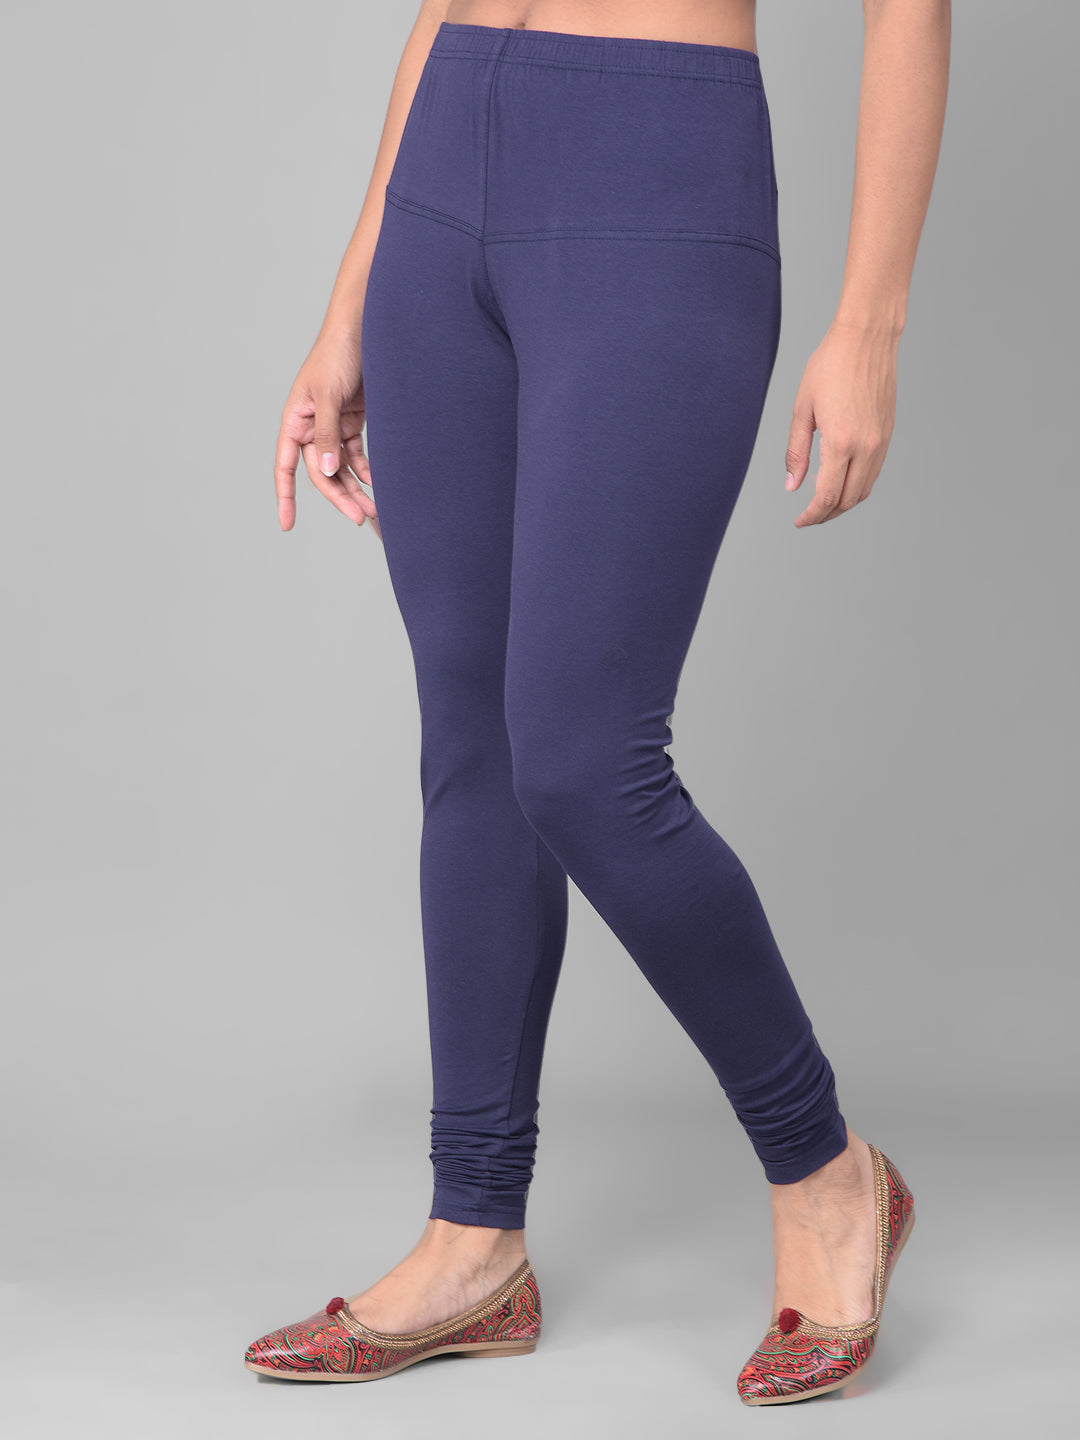 Comfort Lady Regular Fit Indo Cut Leggings - Comfort Lady Private Limited